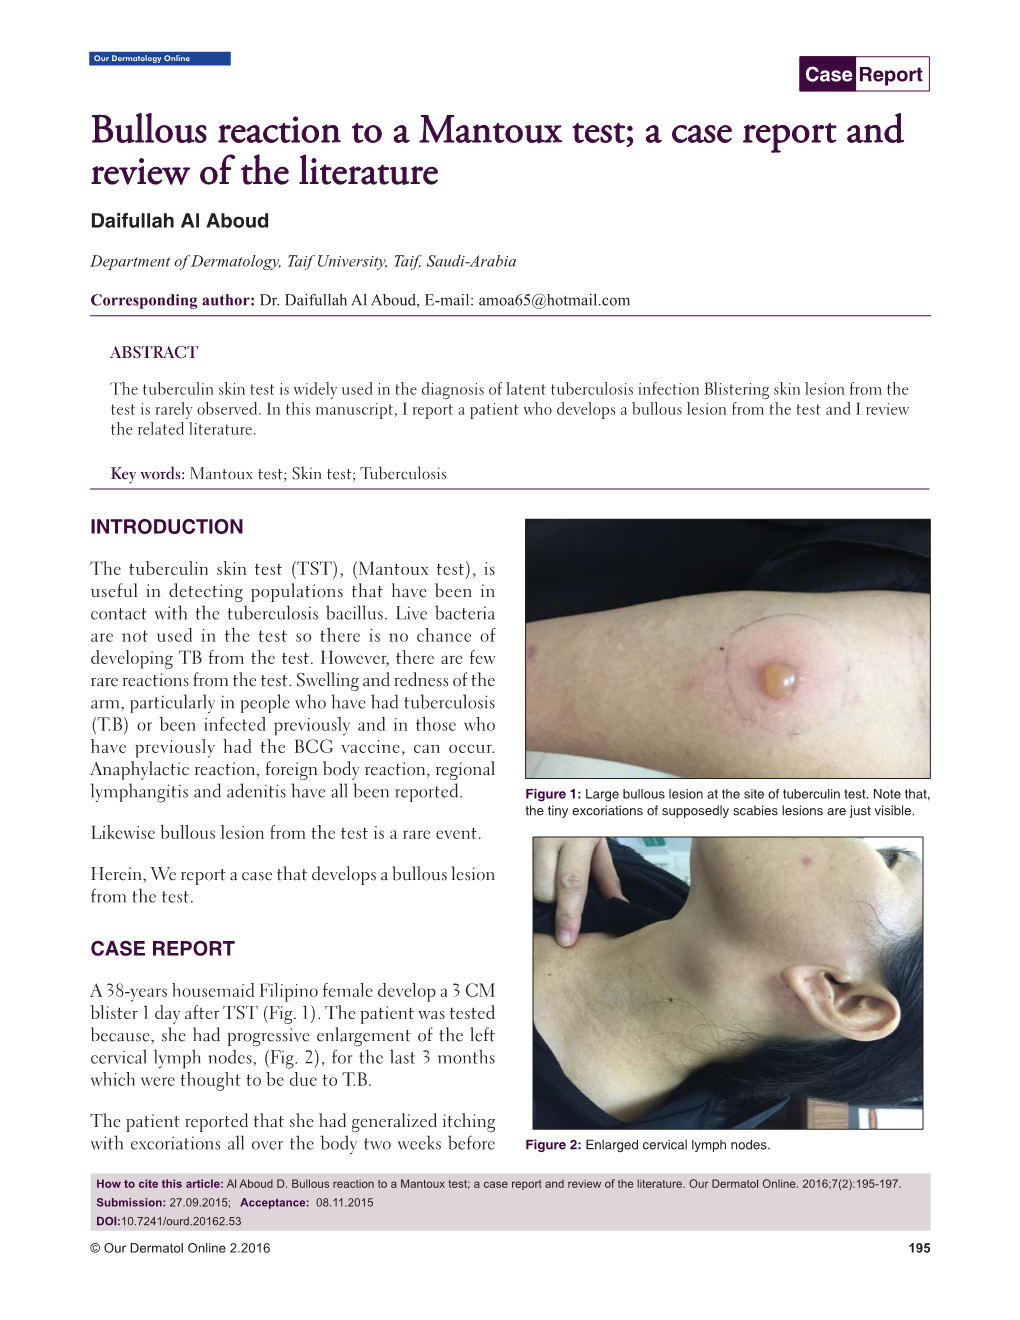 Bullous Reaction to a Mantoux Test; a Case Report and Review of the Literature